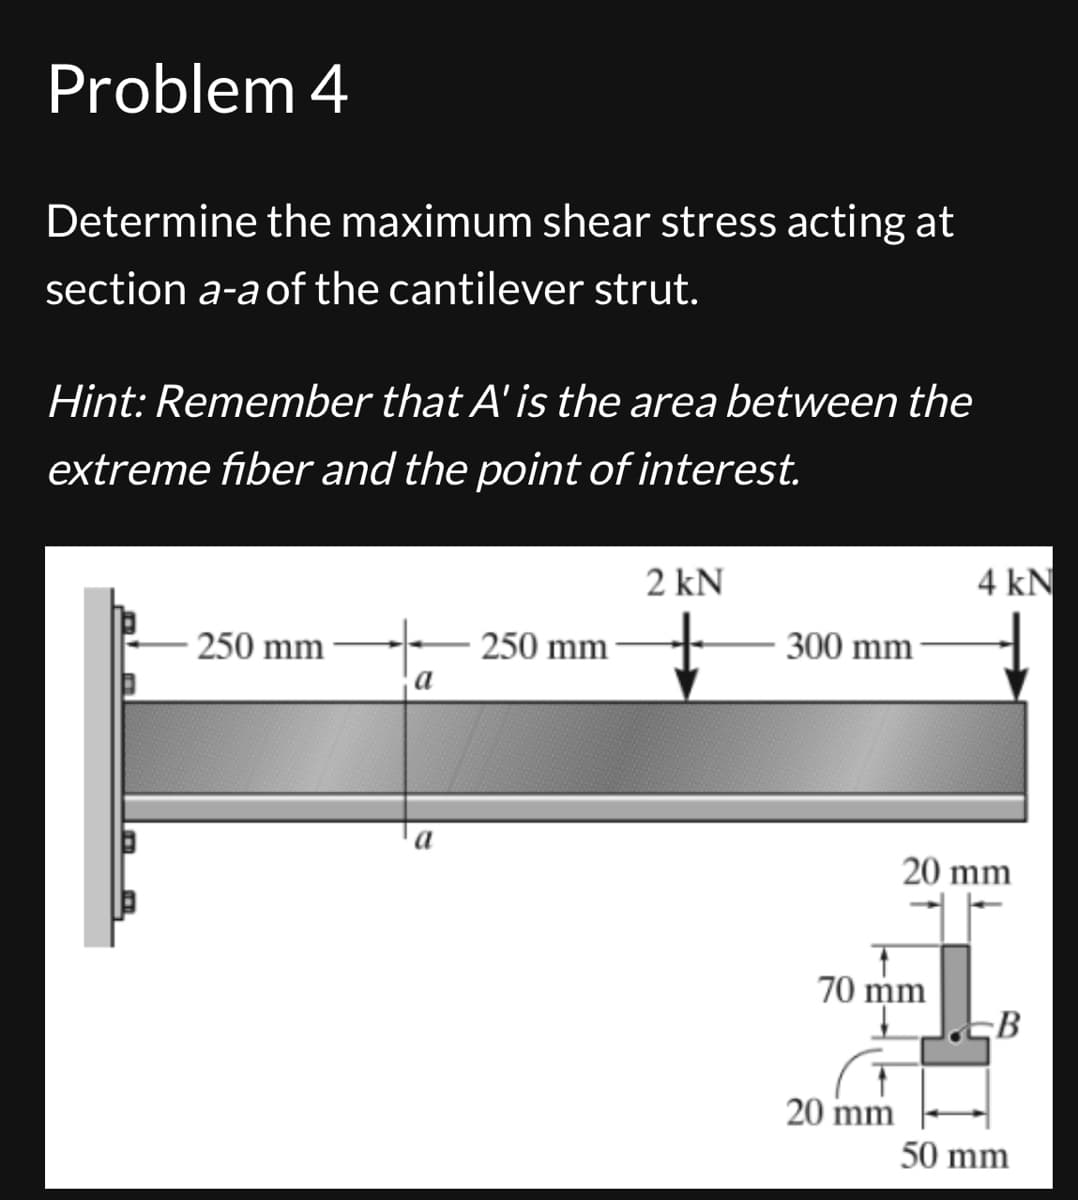 Problem 4
Determine the maximum shear stress acting at
section a-a of the cantilever strut.
Hint: Remember that A' is the area between the
extreme fiber and the point of interest.
2 kN
4 kN
250 mm
250 mm
300 mm
a
a
20 mm
70 mm
B
20 mm
50 mm